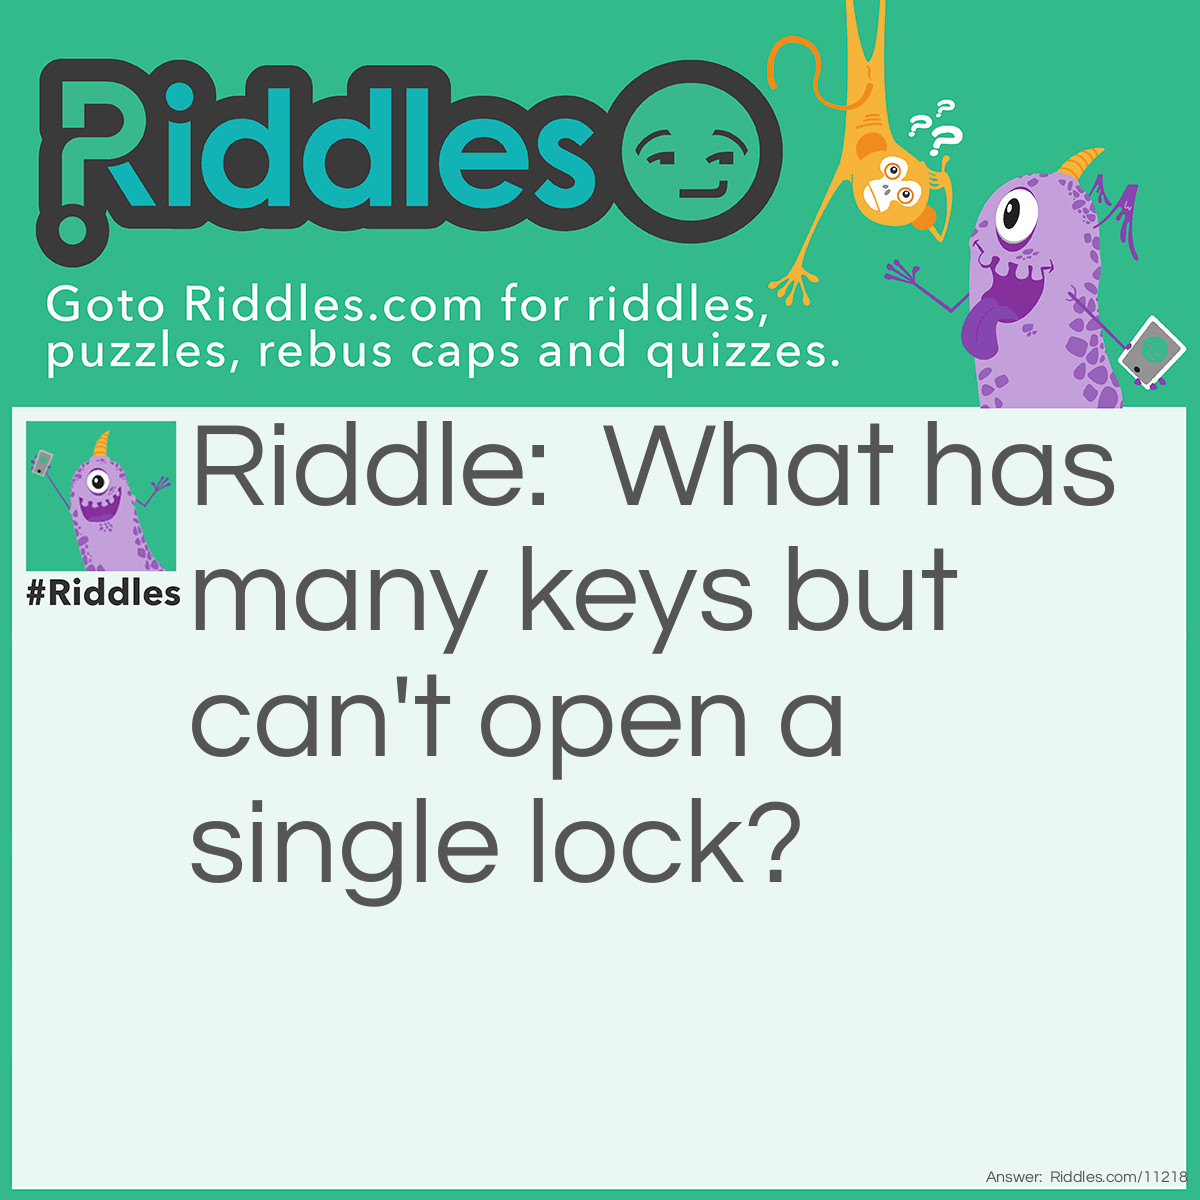 Riddle: What has many keys but can't open a single lock? Answer: A piano